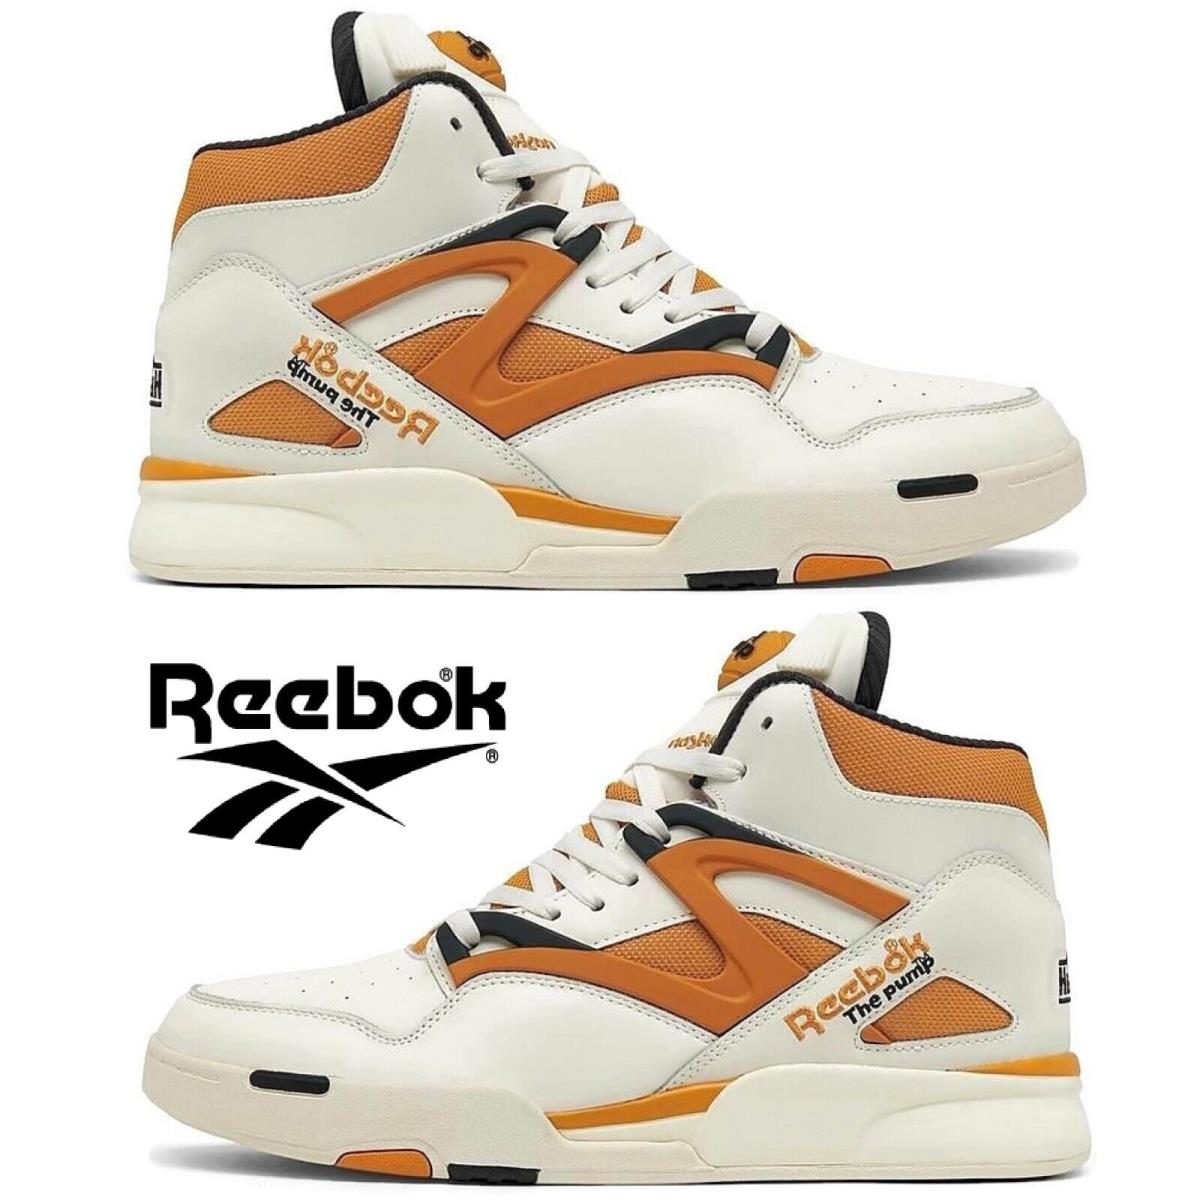 Reebok Pump Omni Zone 2 Basketball Shoes Men`s Sneakers Running Casual Sport - White, Manufacturer: Chalk/Radiant Ochre/Pure Grey